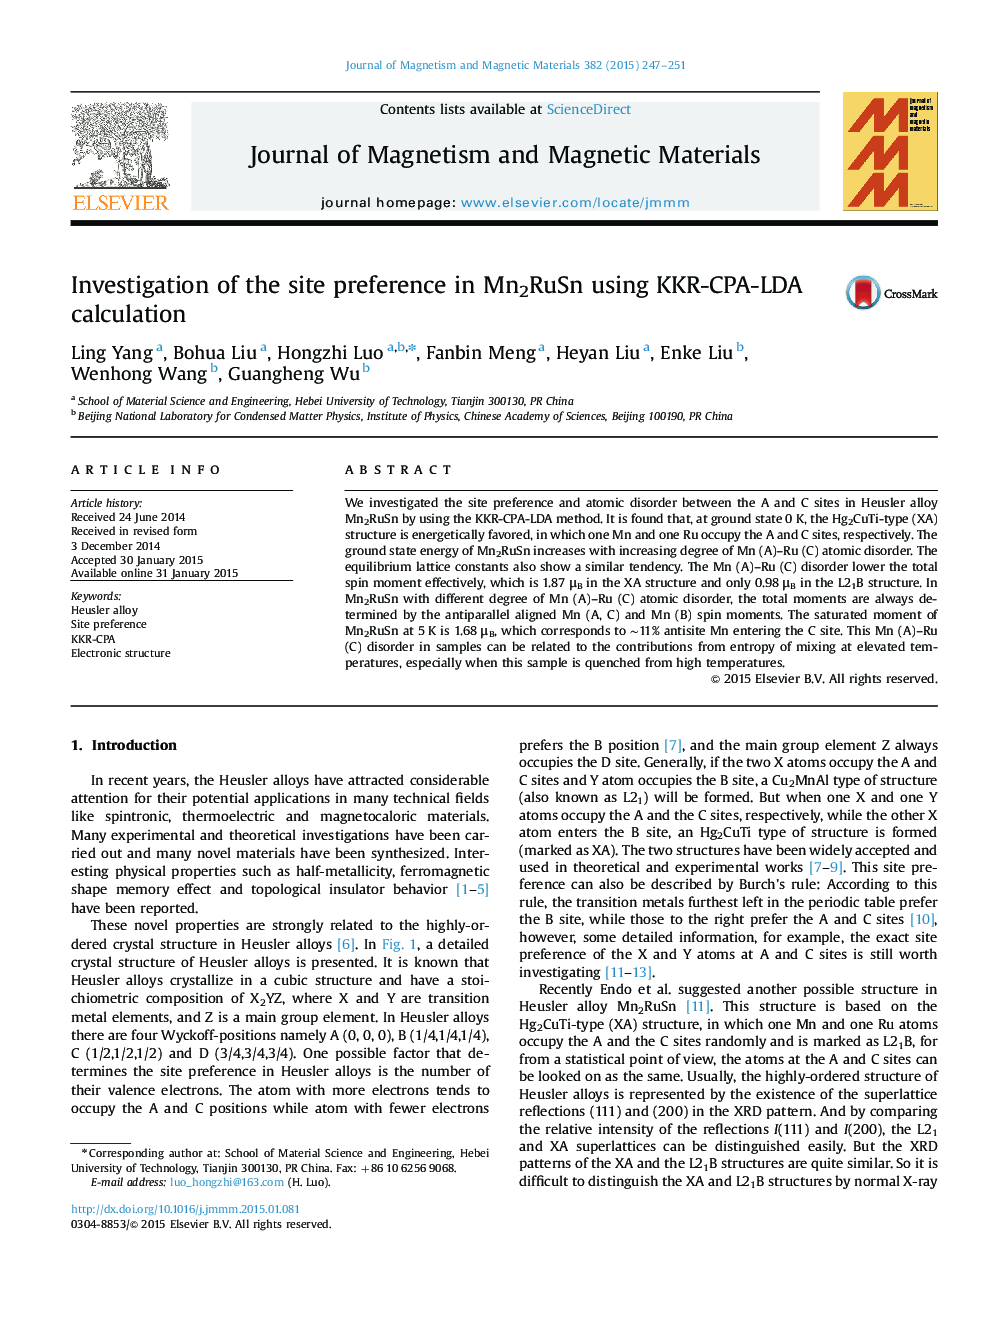 Investigation of the site preference in Mn2RuSn using KKR-CPA-LDA calculation